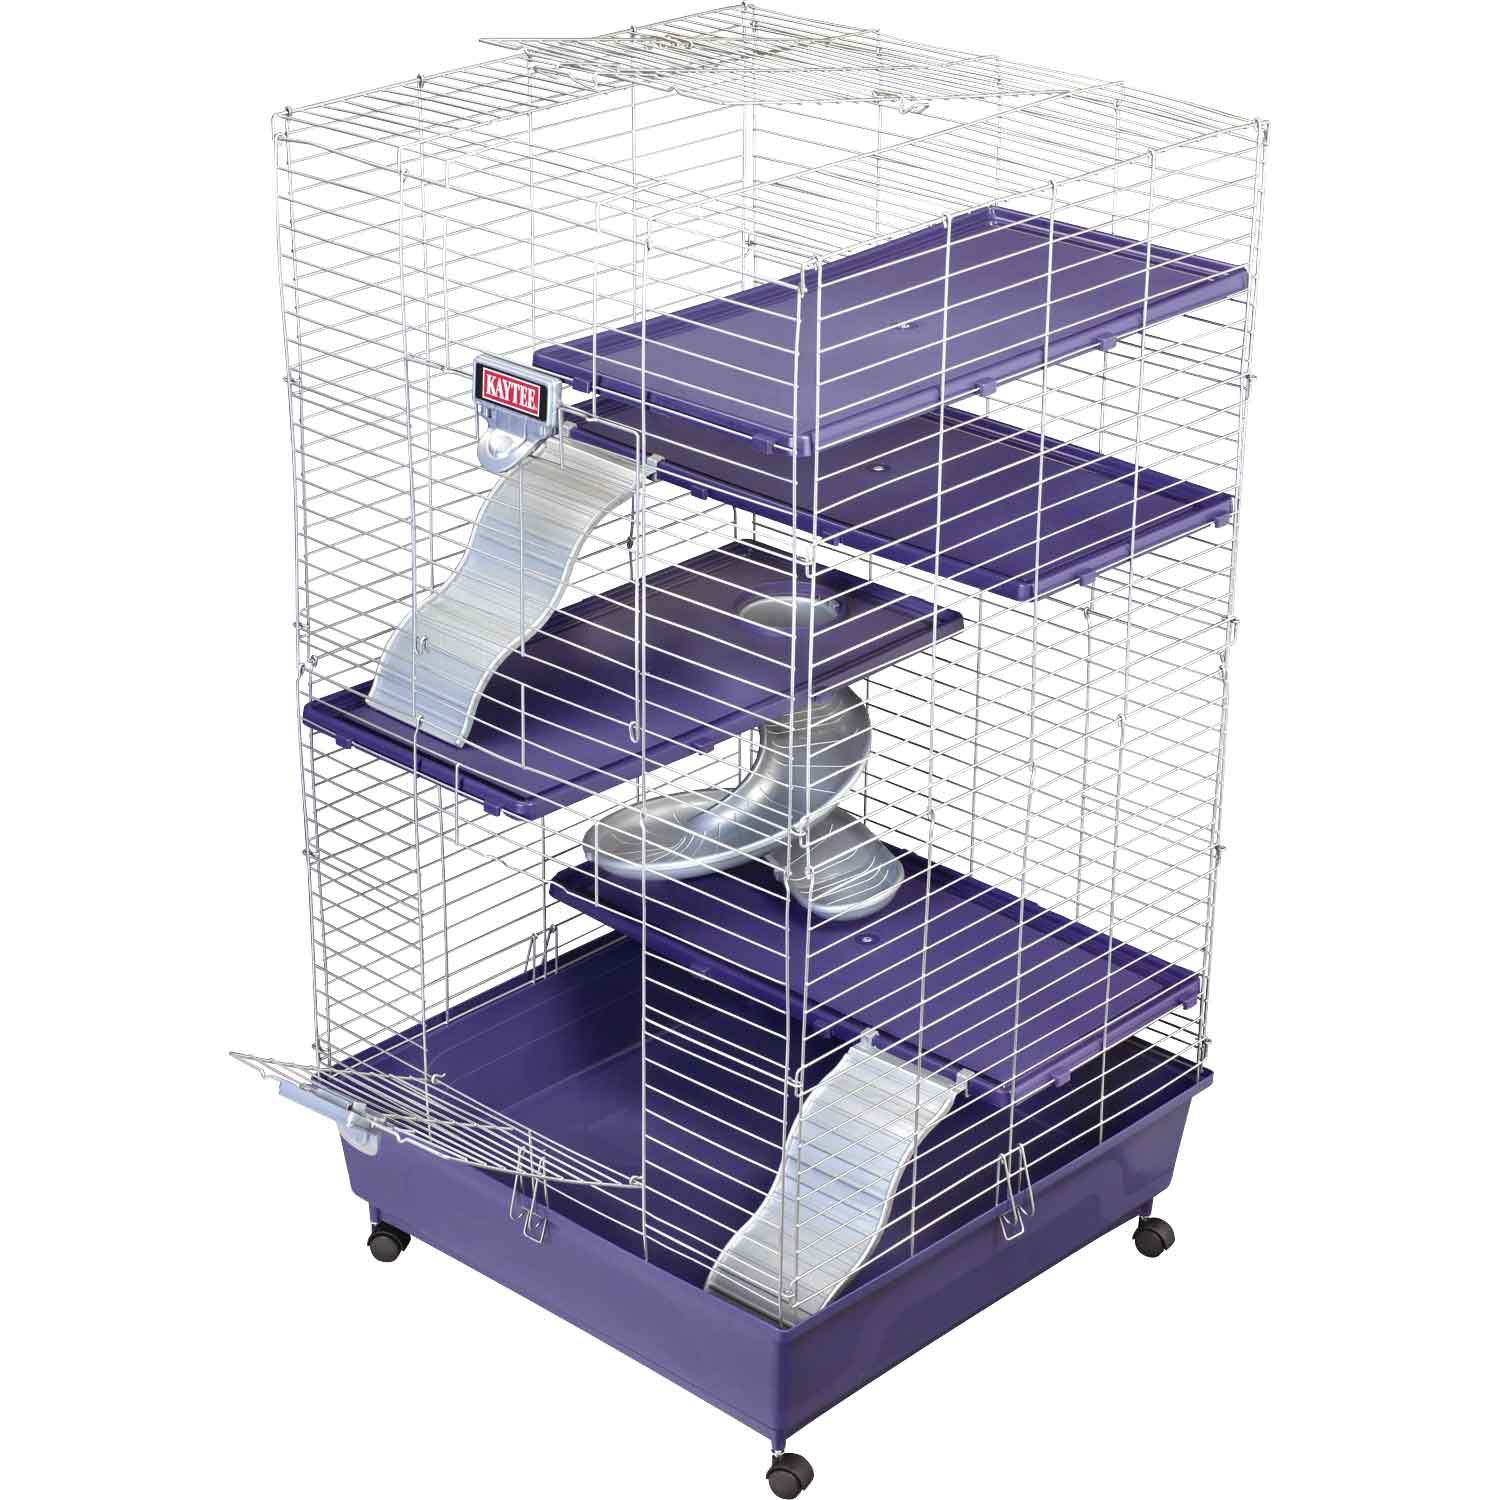 Photos - Rodent Cage / House Kaytee Ferret Home Plus, 24" L X 24" W X 41.5" H, 24 IN, Purple 100 